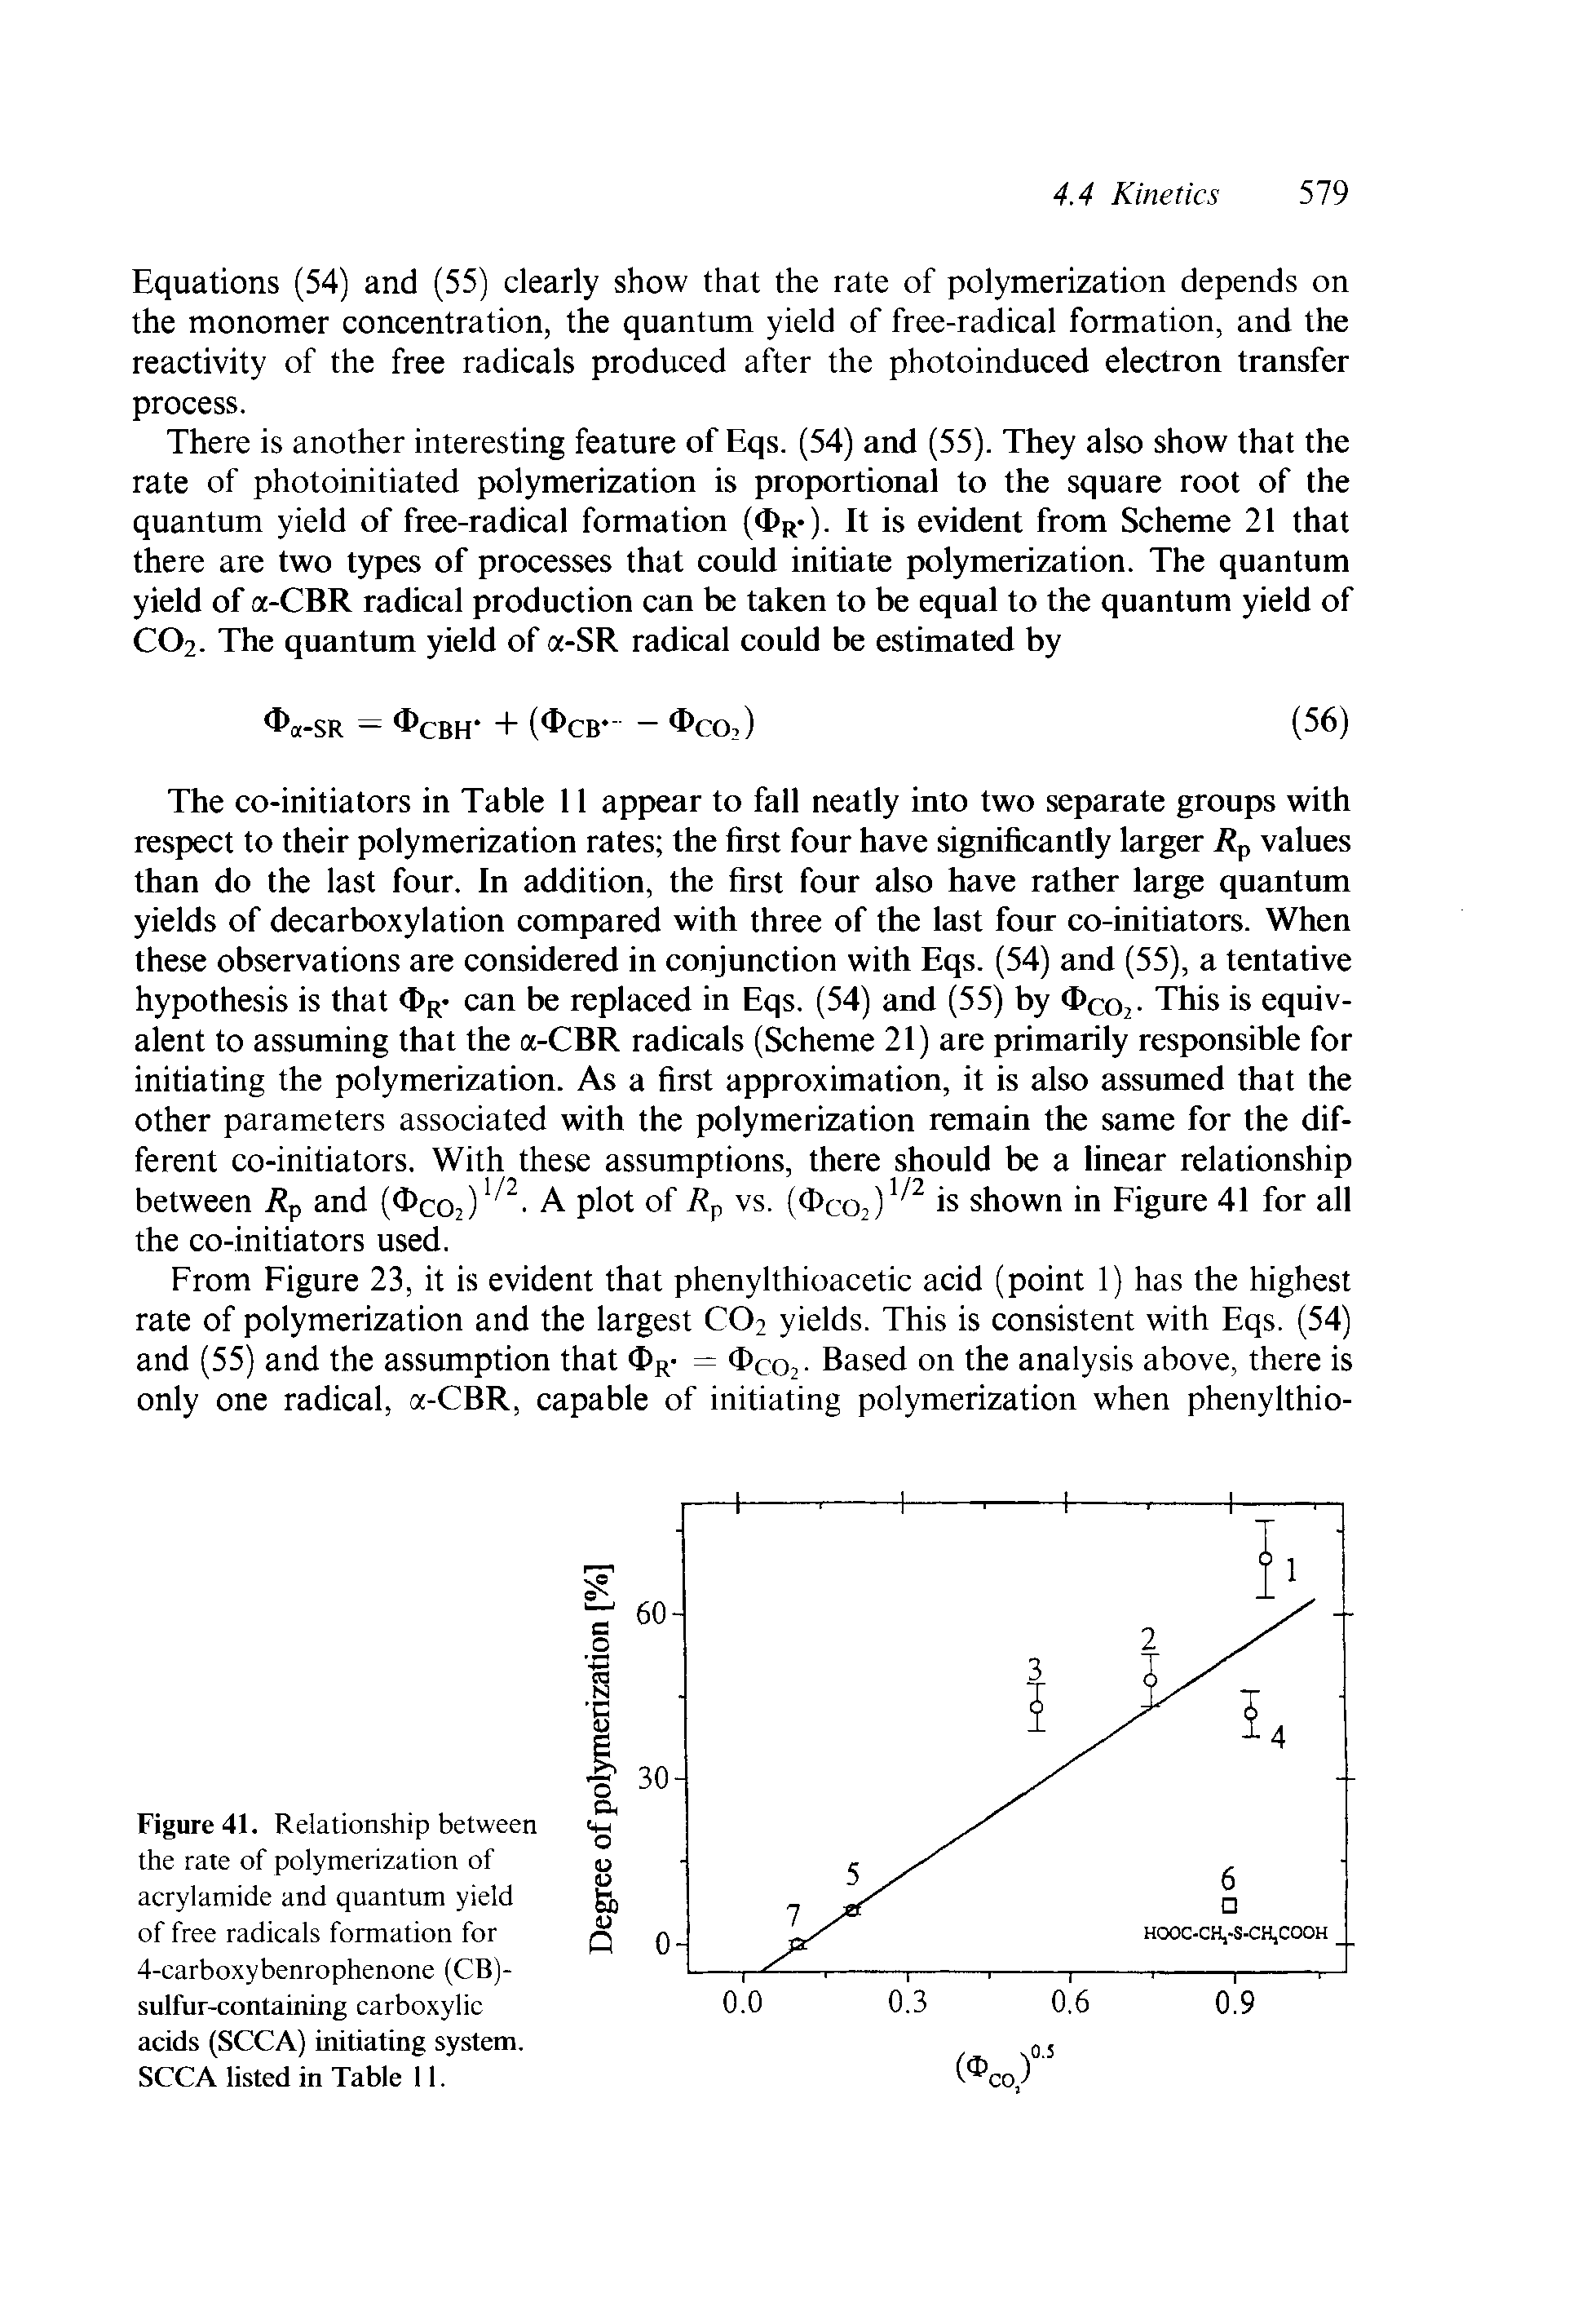 Figure41. Relationship between the rate of polymerization of acrylamide and quantum yield of free radicals formation for 4-carboxybenrophenone (CB)-sulfur-containing carboxylic acids (SCCA) initiating system. SCCA listed in Table 11.